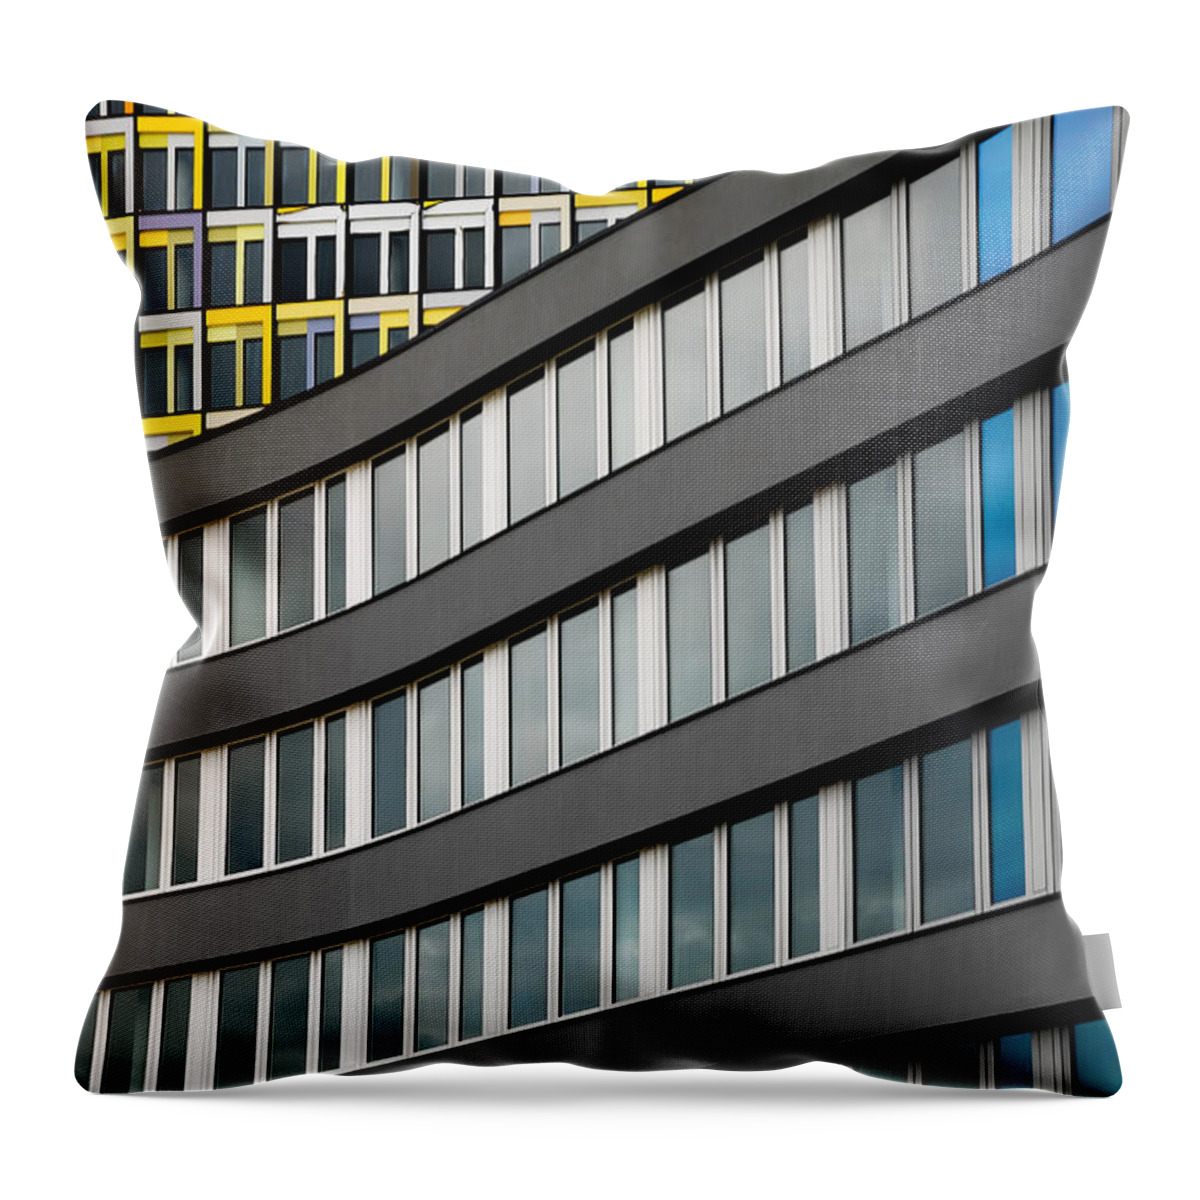 Adac Throw Pillow featuring the photograph Urban Rectangles by Hannes Cmarits